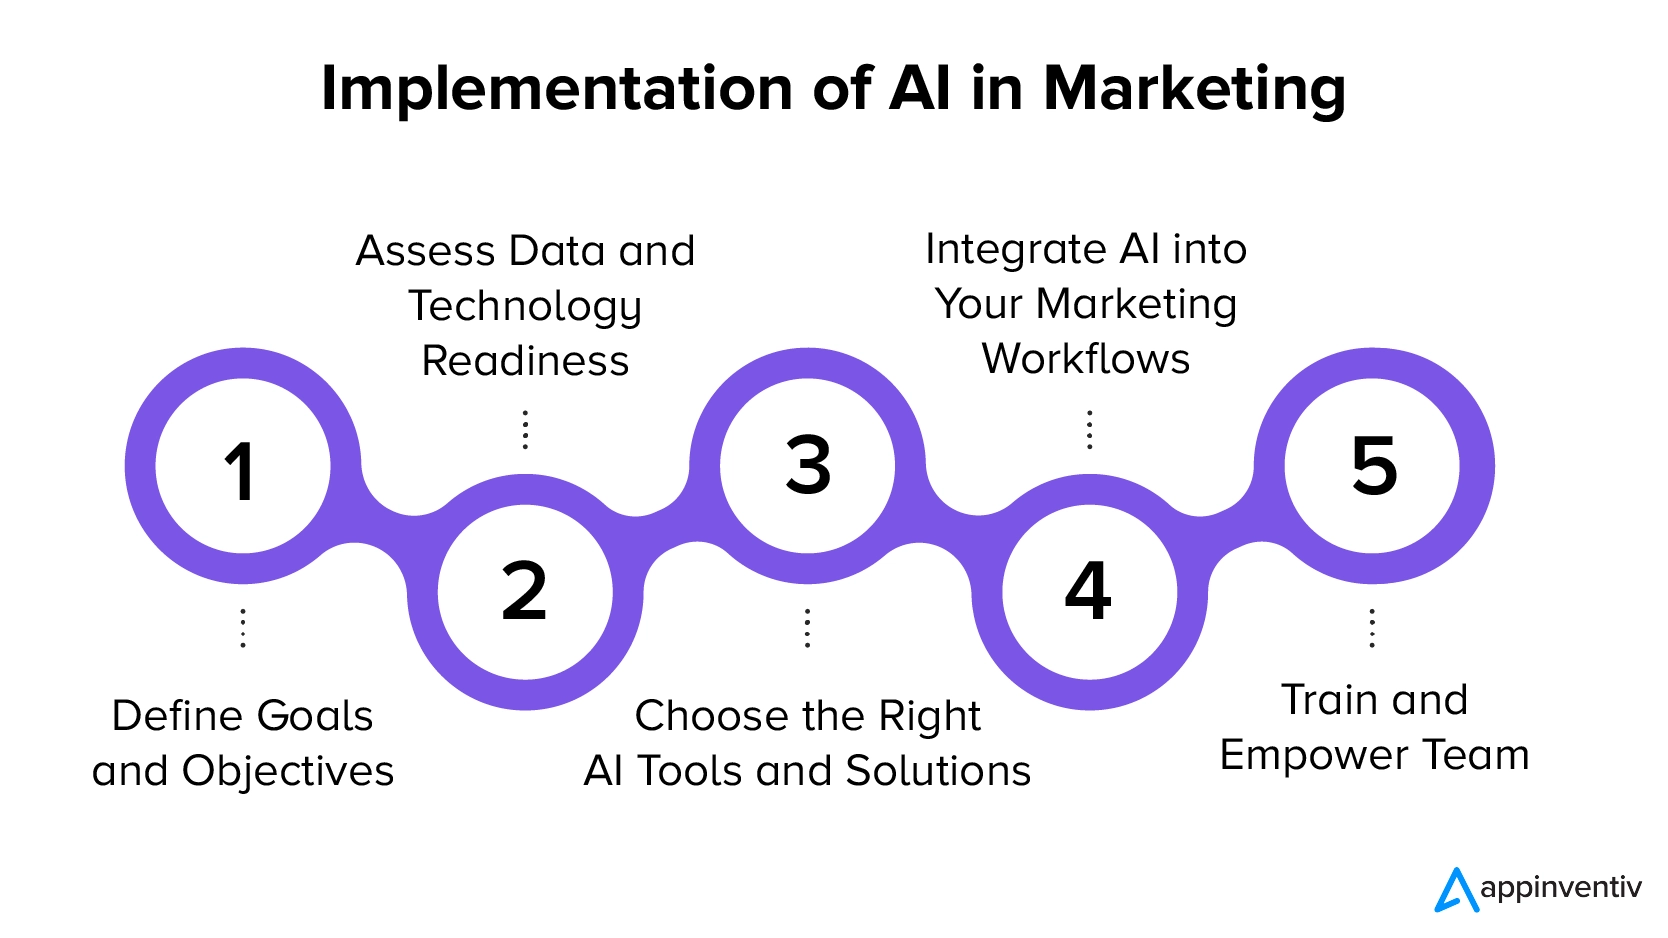 Implementation of AI in marketing